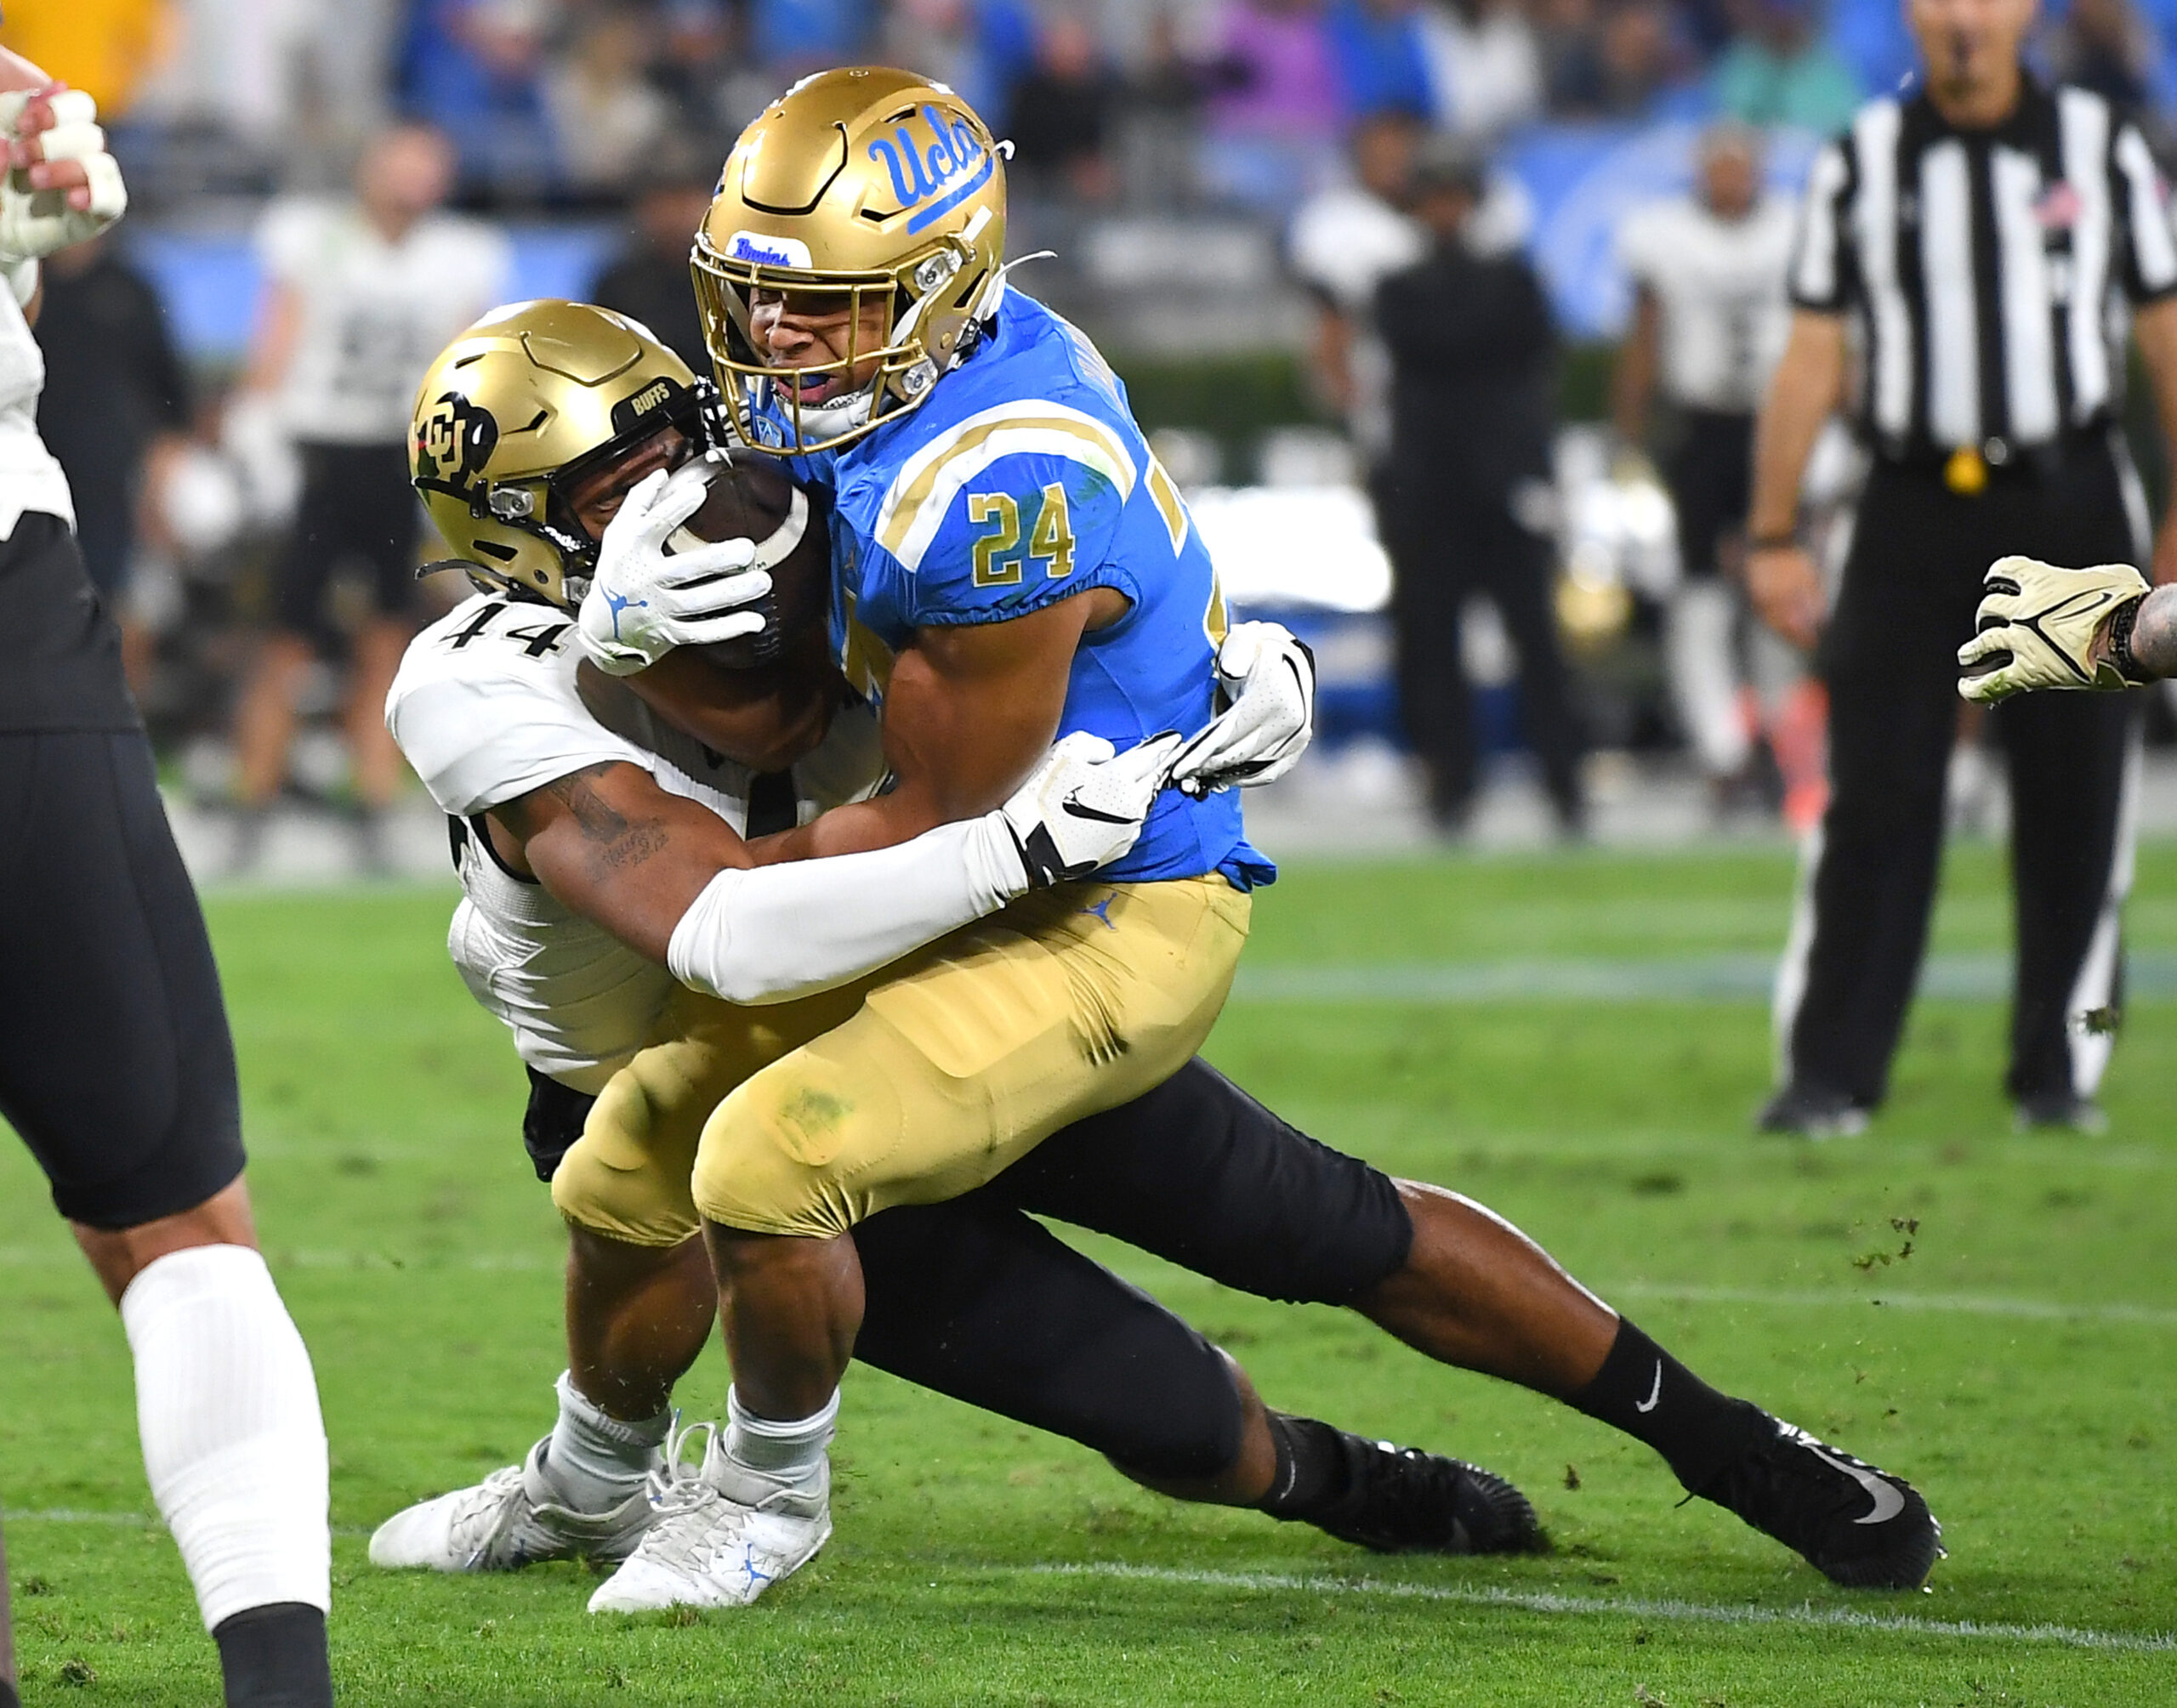 UCLA running back Zach Charbonnet could be game-time decision vs. CU Buffs